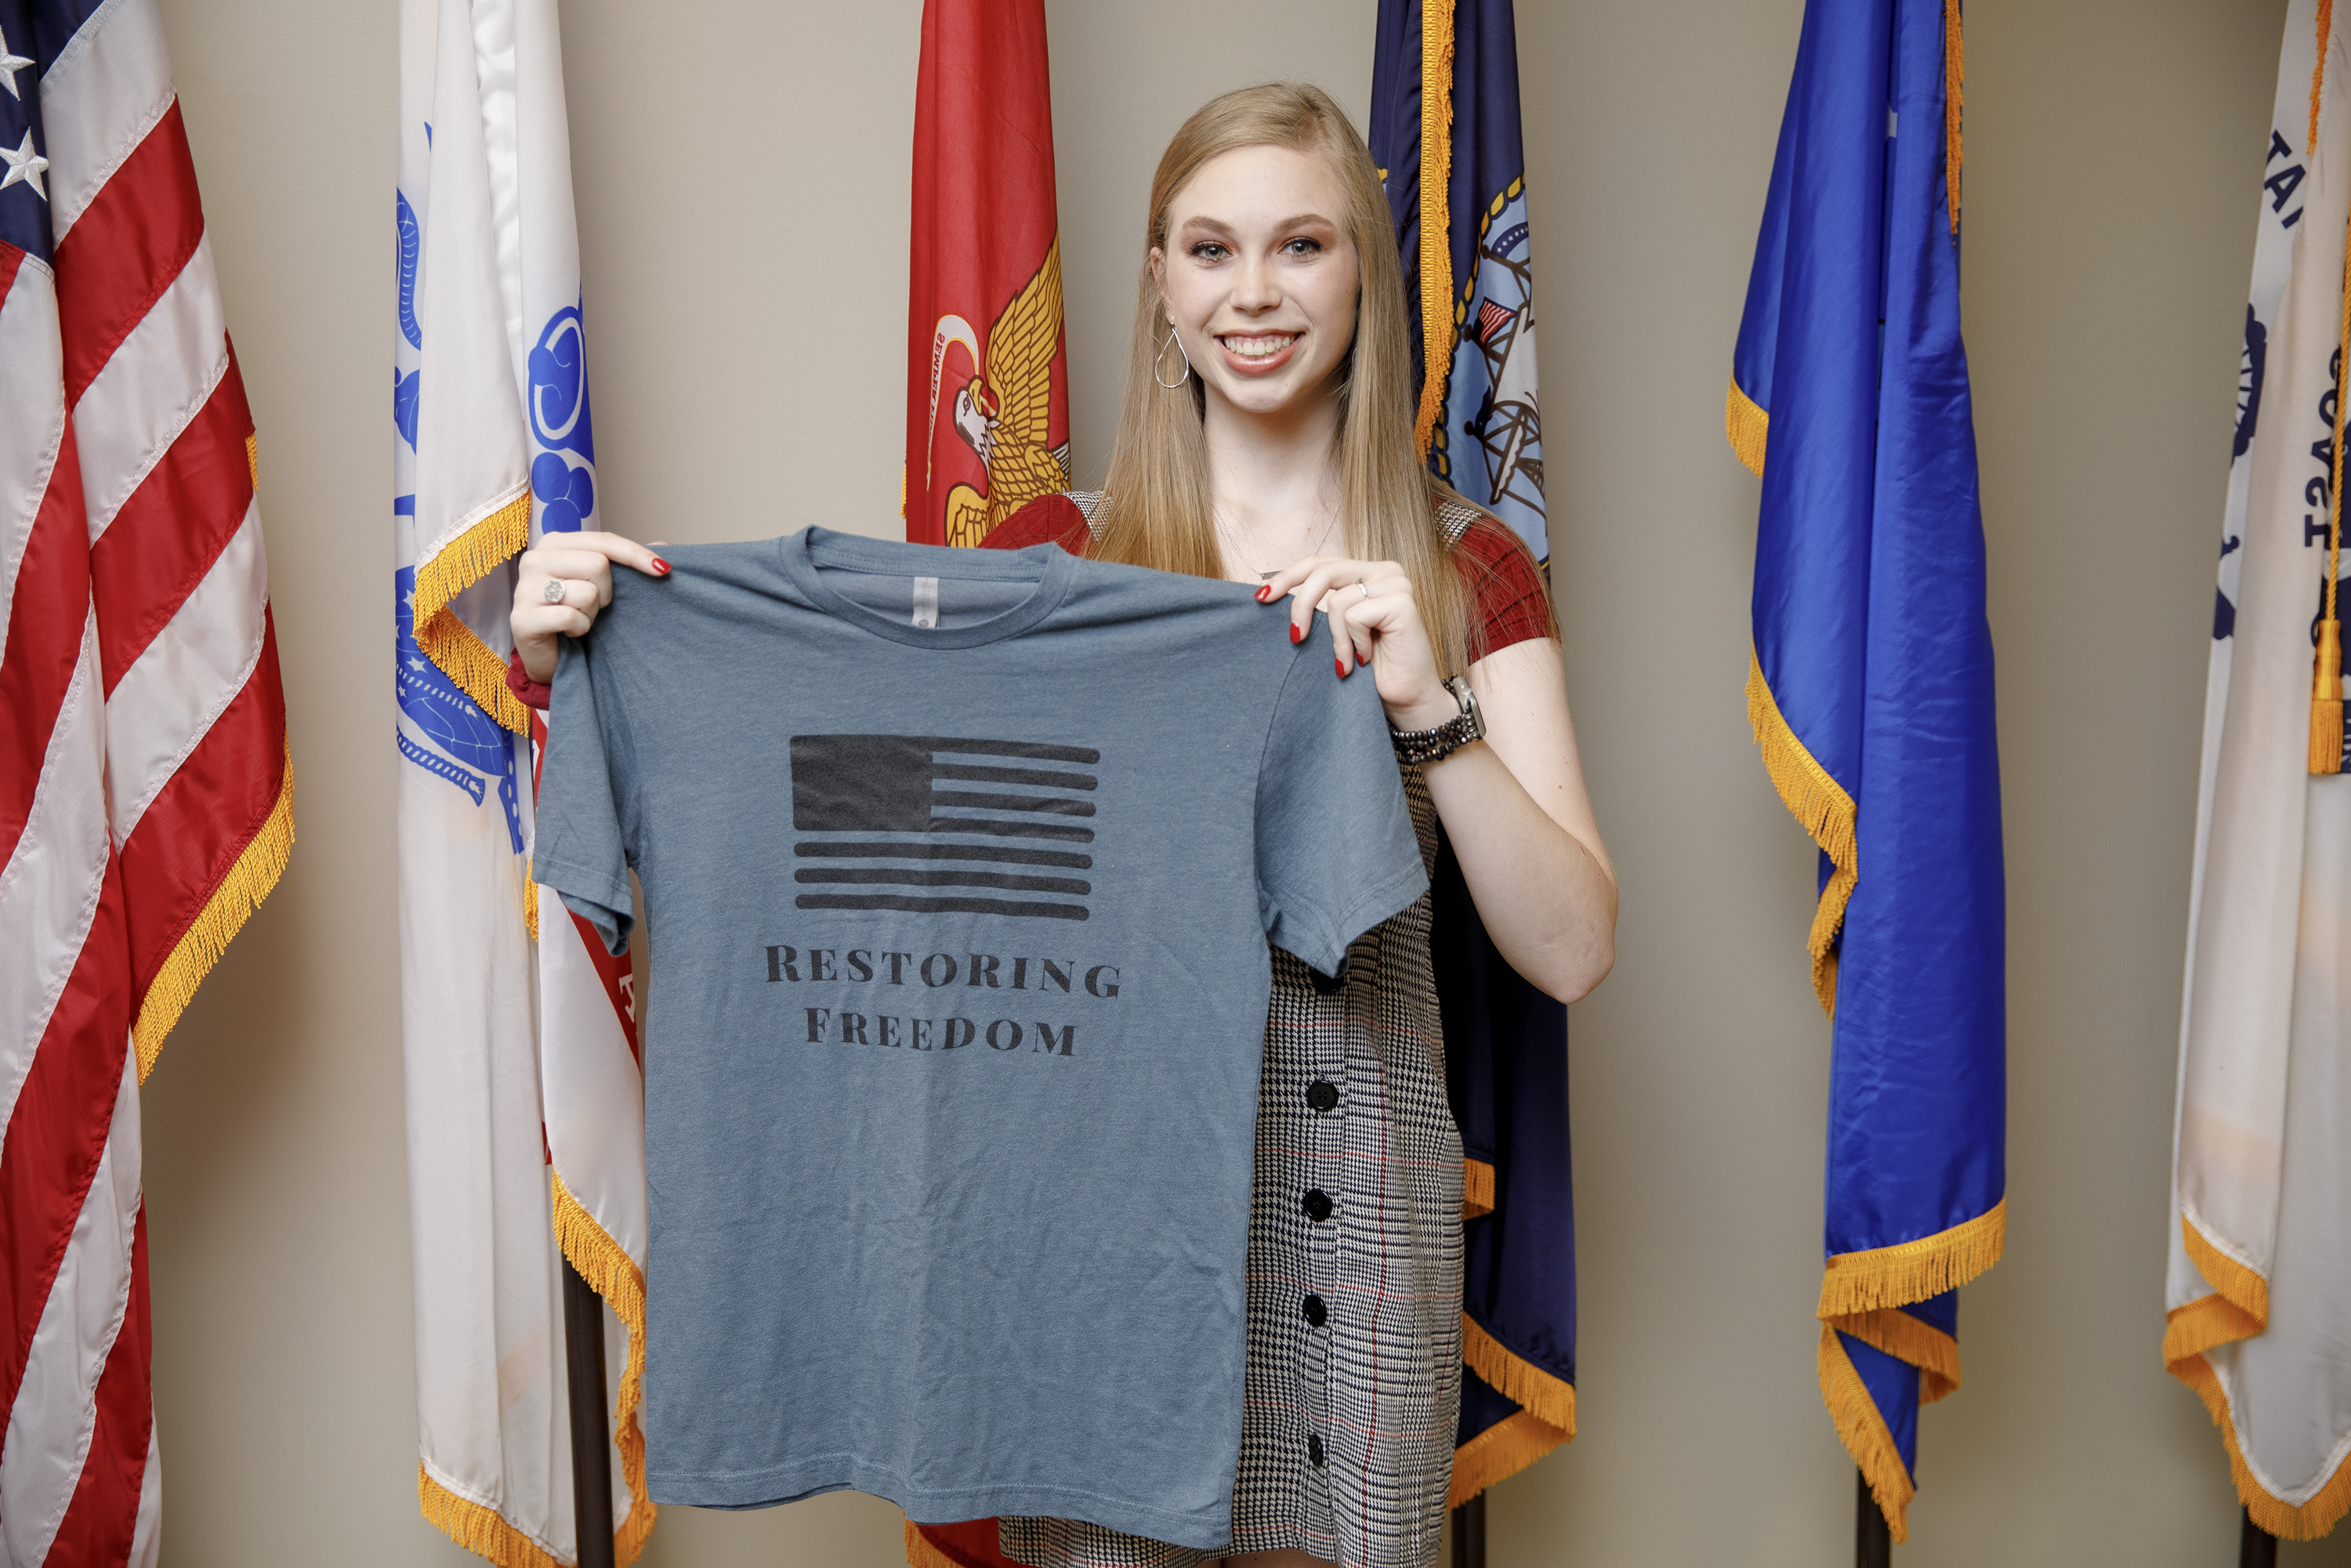 A female college student holds a T-shirt related to her non-profit organization